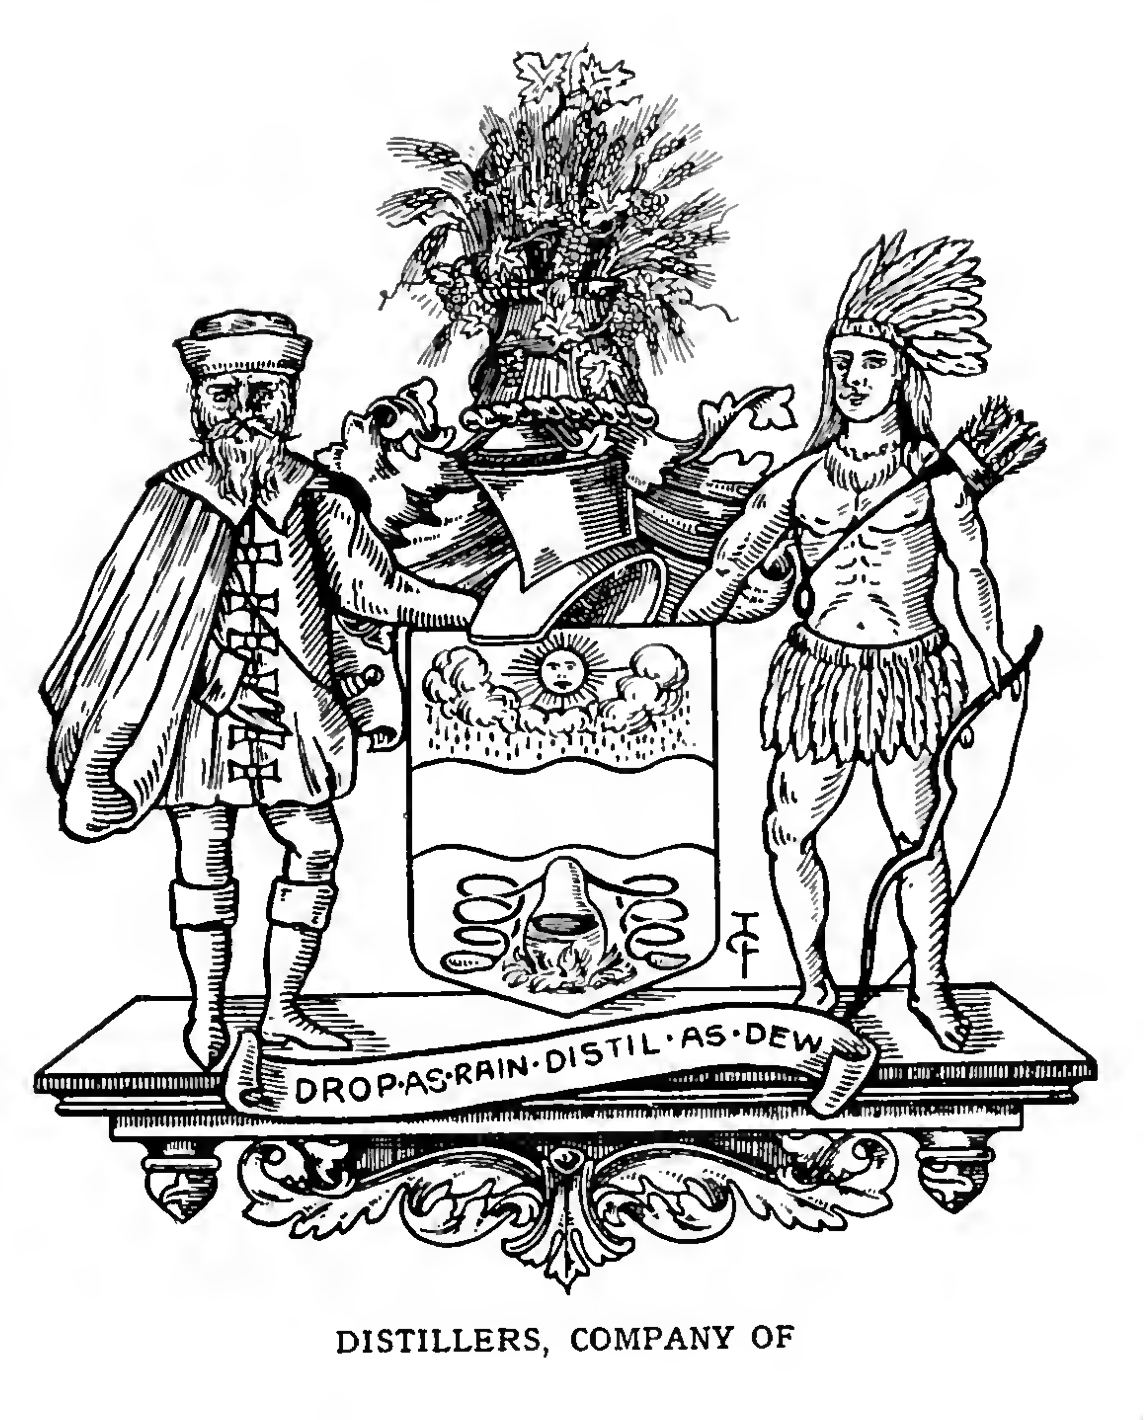 DISTILLERS, The Worshipful Company of (London).